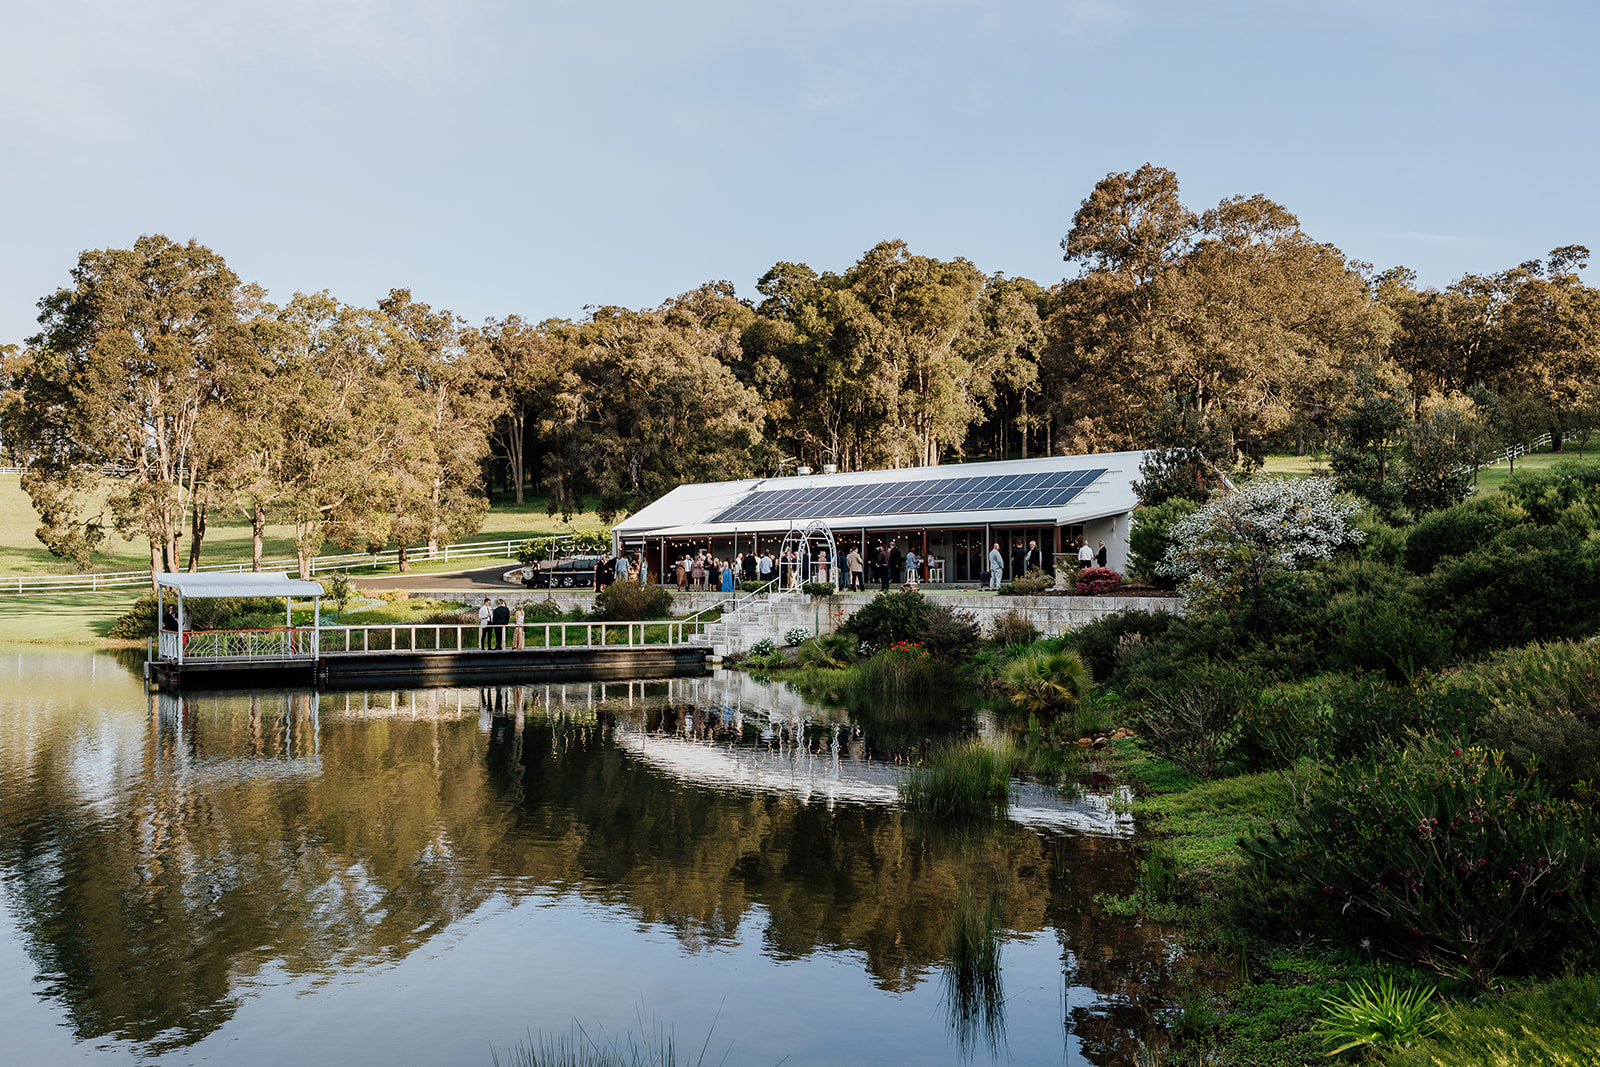 An Edith Valley Wedding in the picturesque South West hills